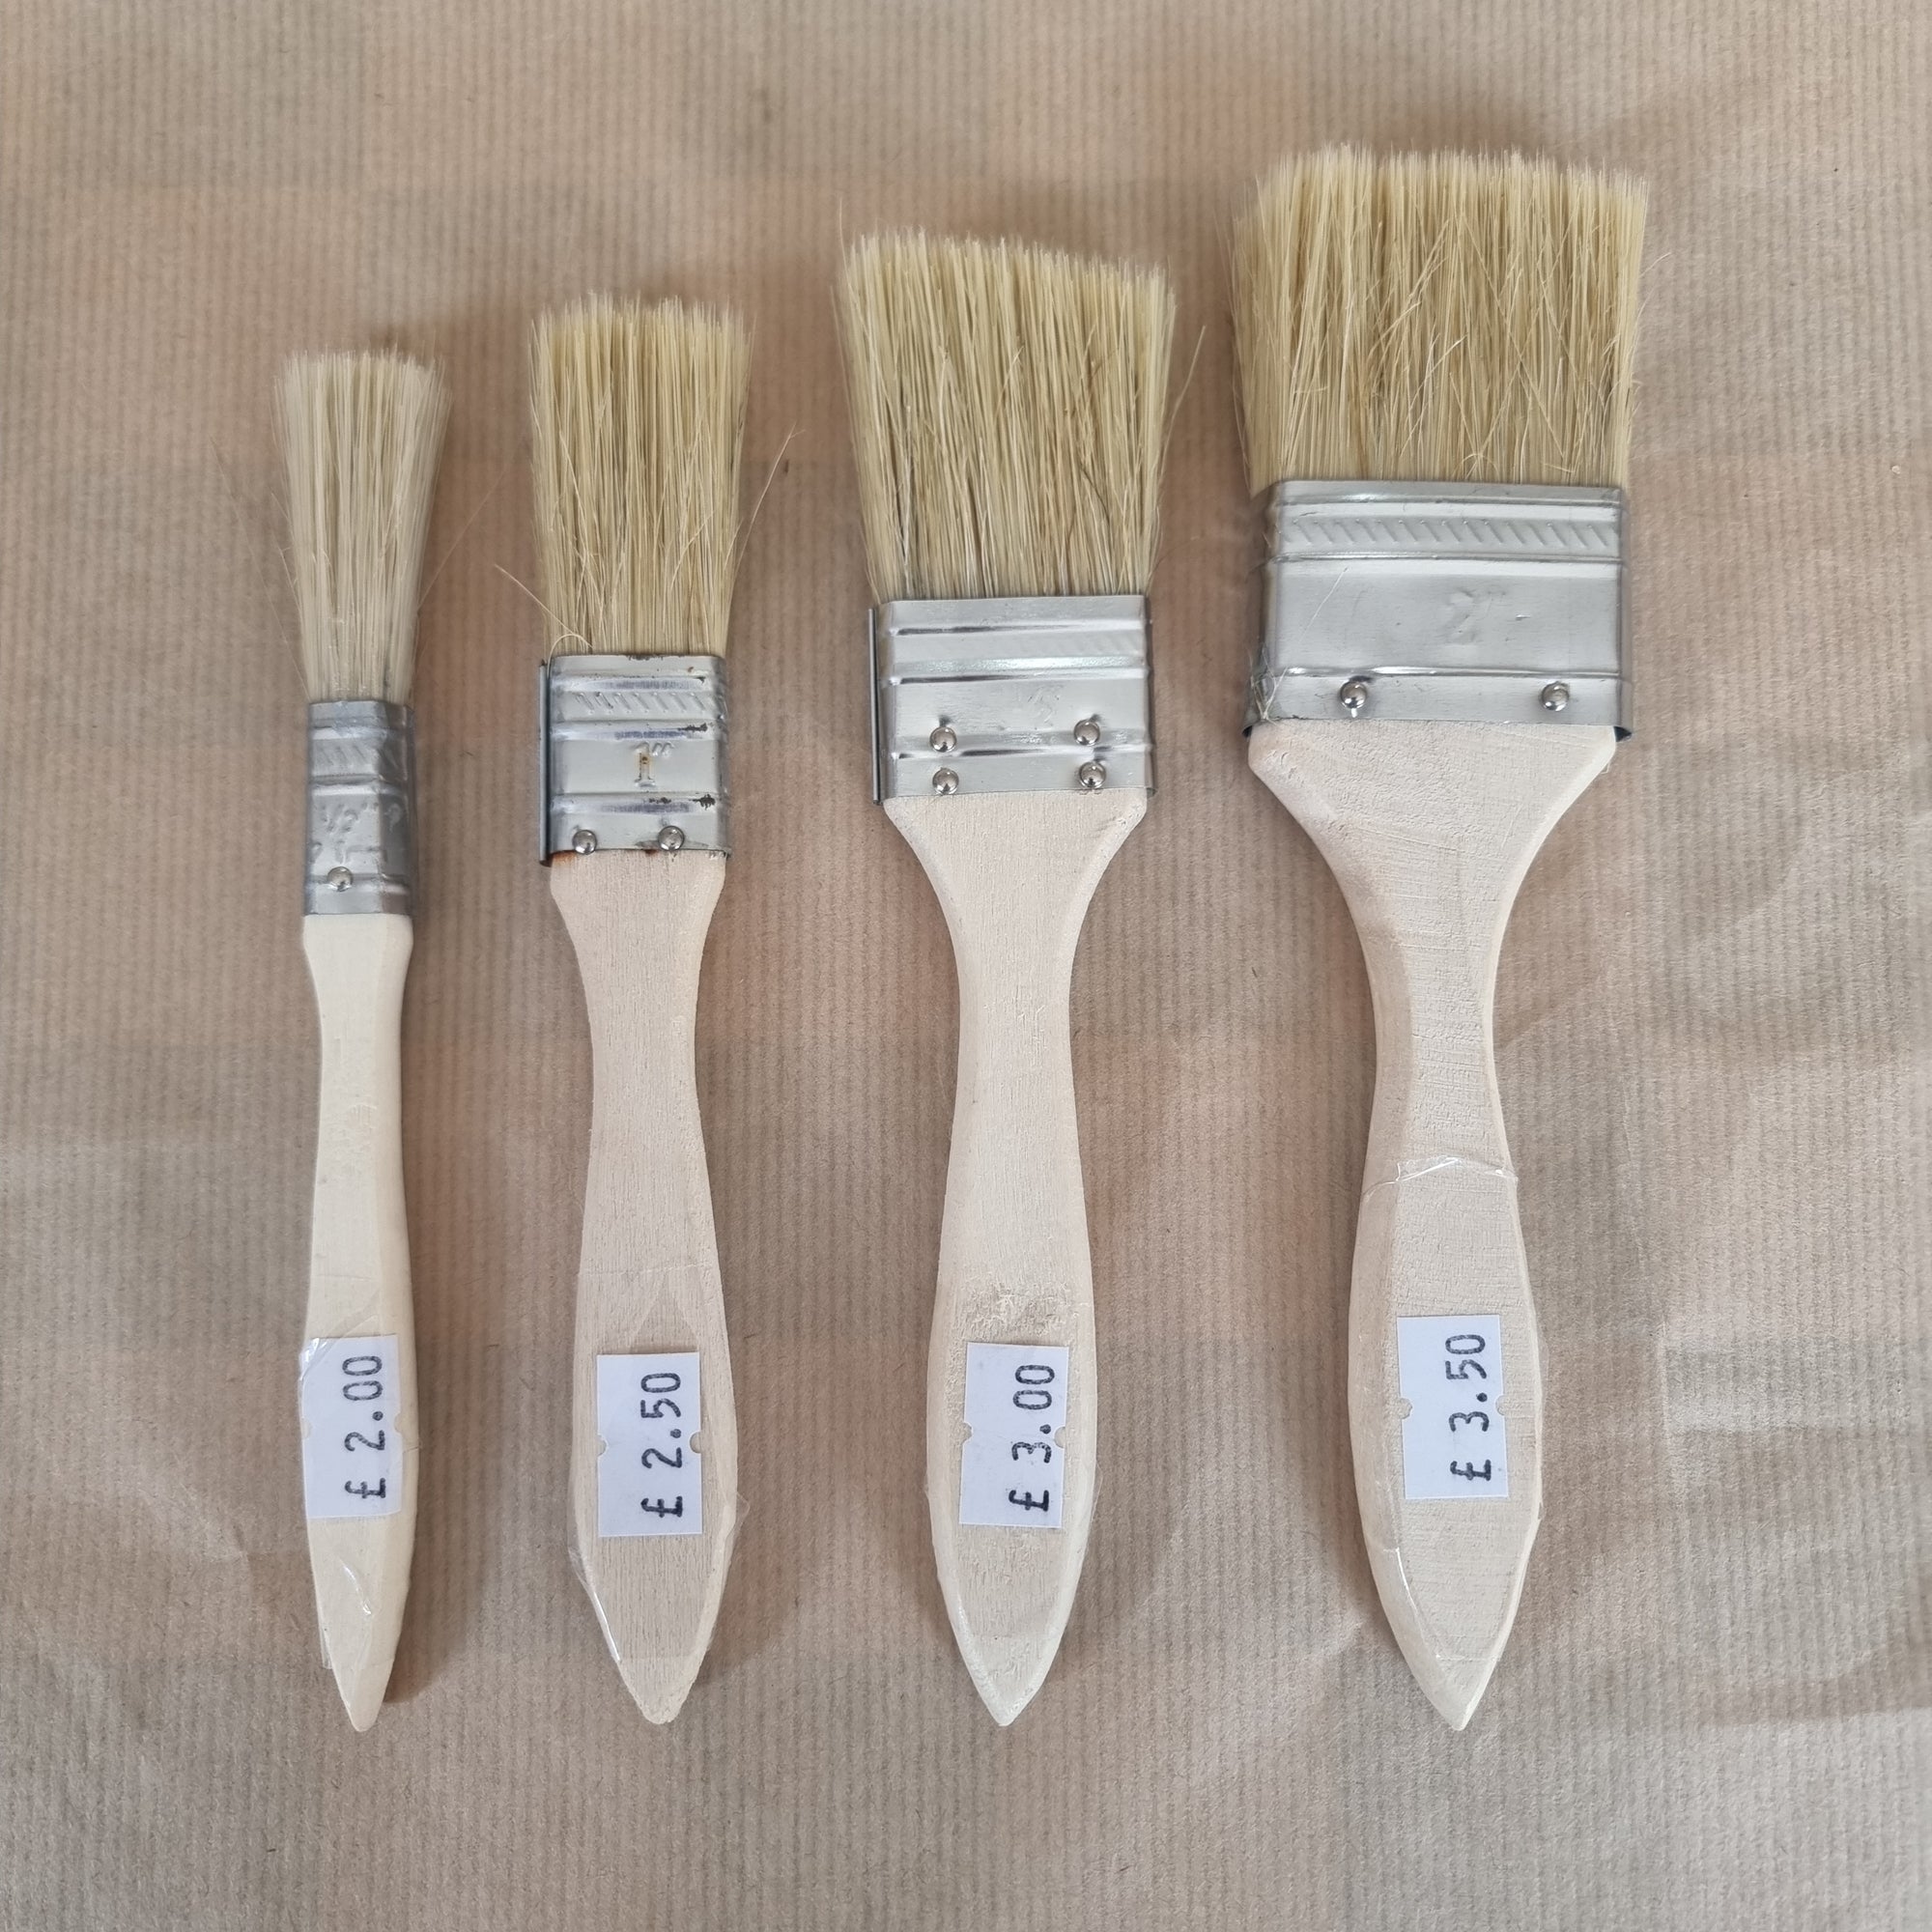 Painter's Wooden Paint Brushes